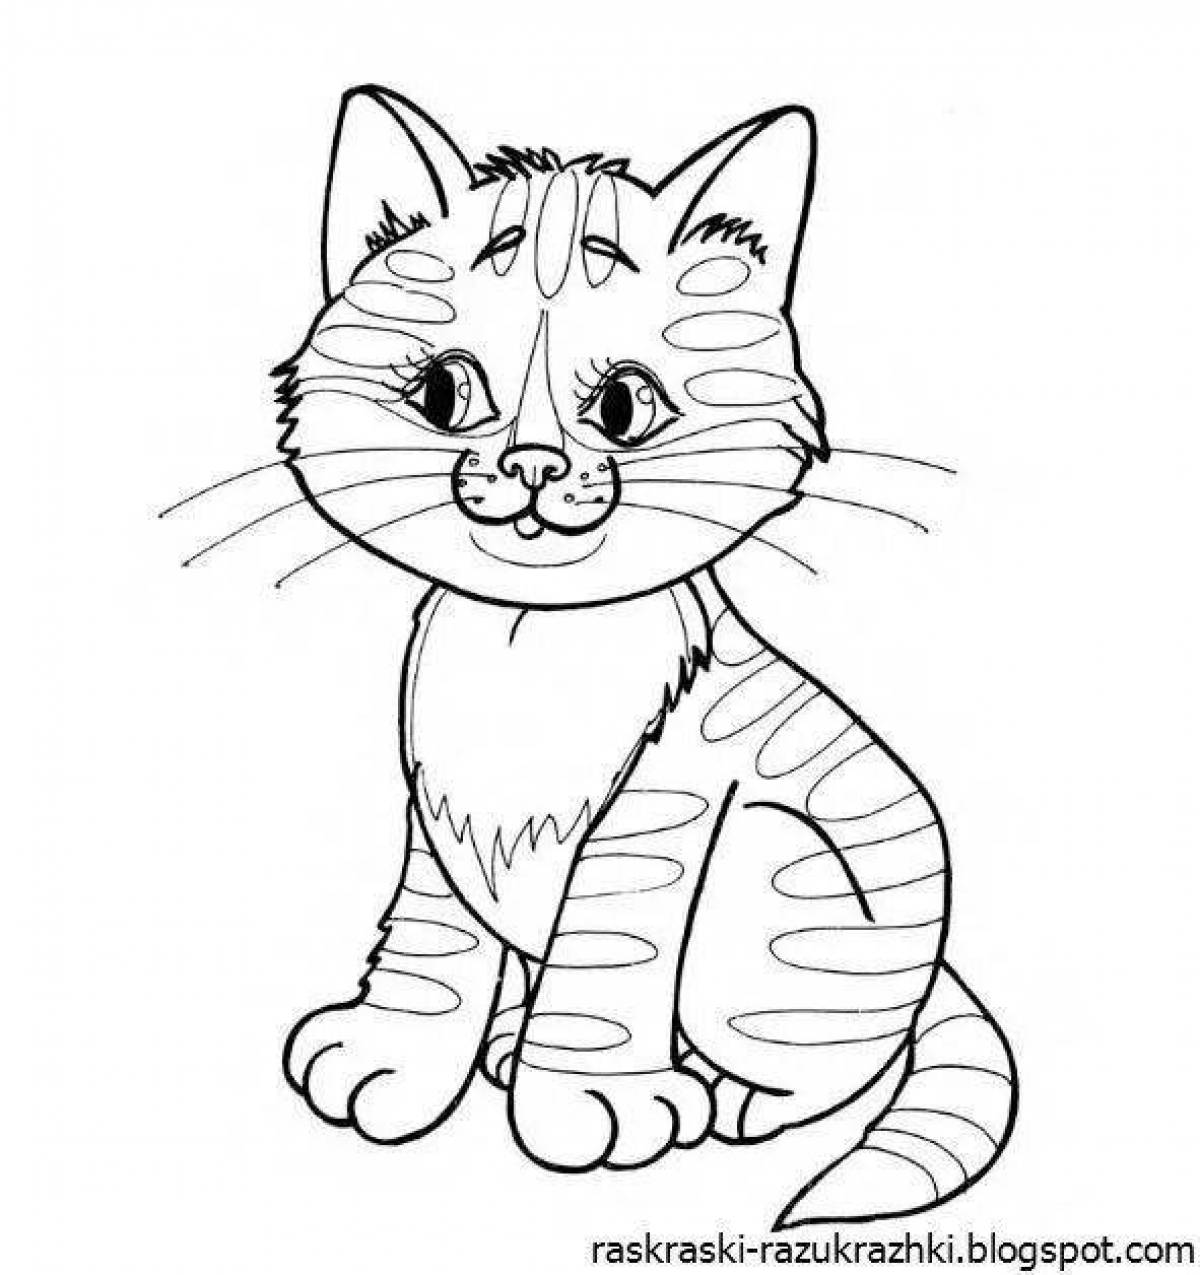 Coloring page graceful kitten for children 5-6 years old